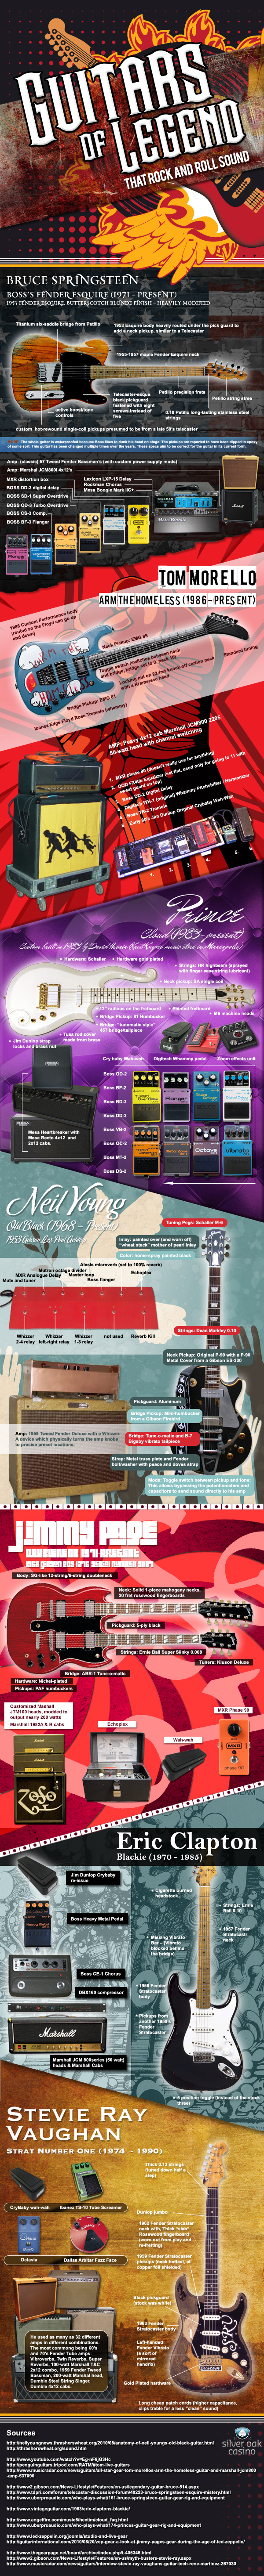 Guitars of Legend: That Rock and Roll Sound